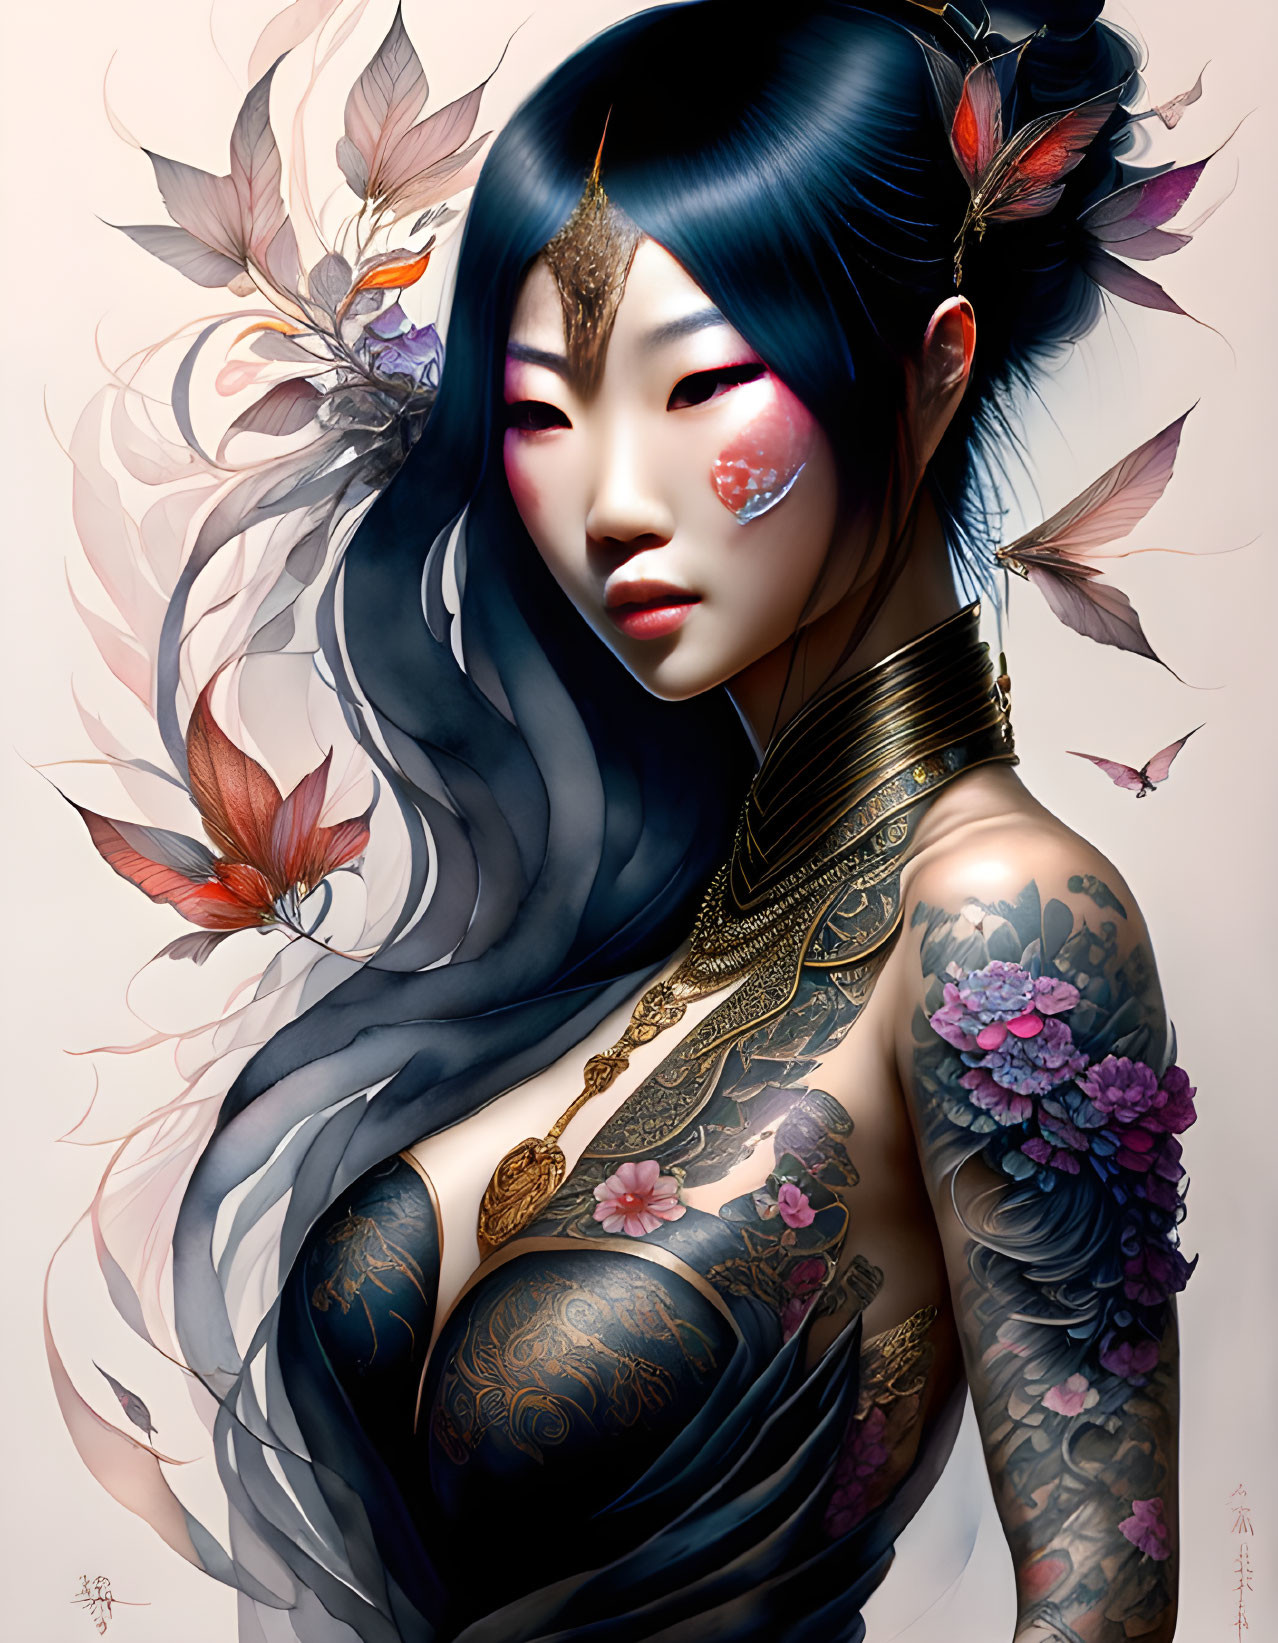 Detailed Illustration of Woman with Blue-Black Hair, Feather Adornments, Golden Neckpiece,